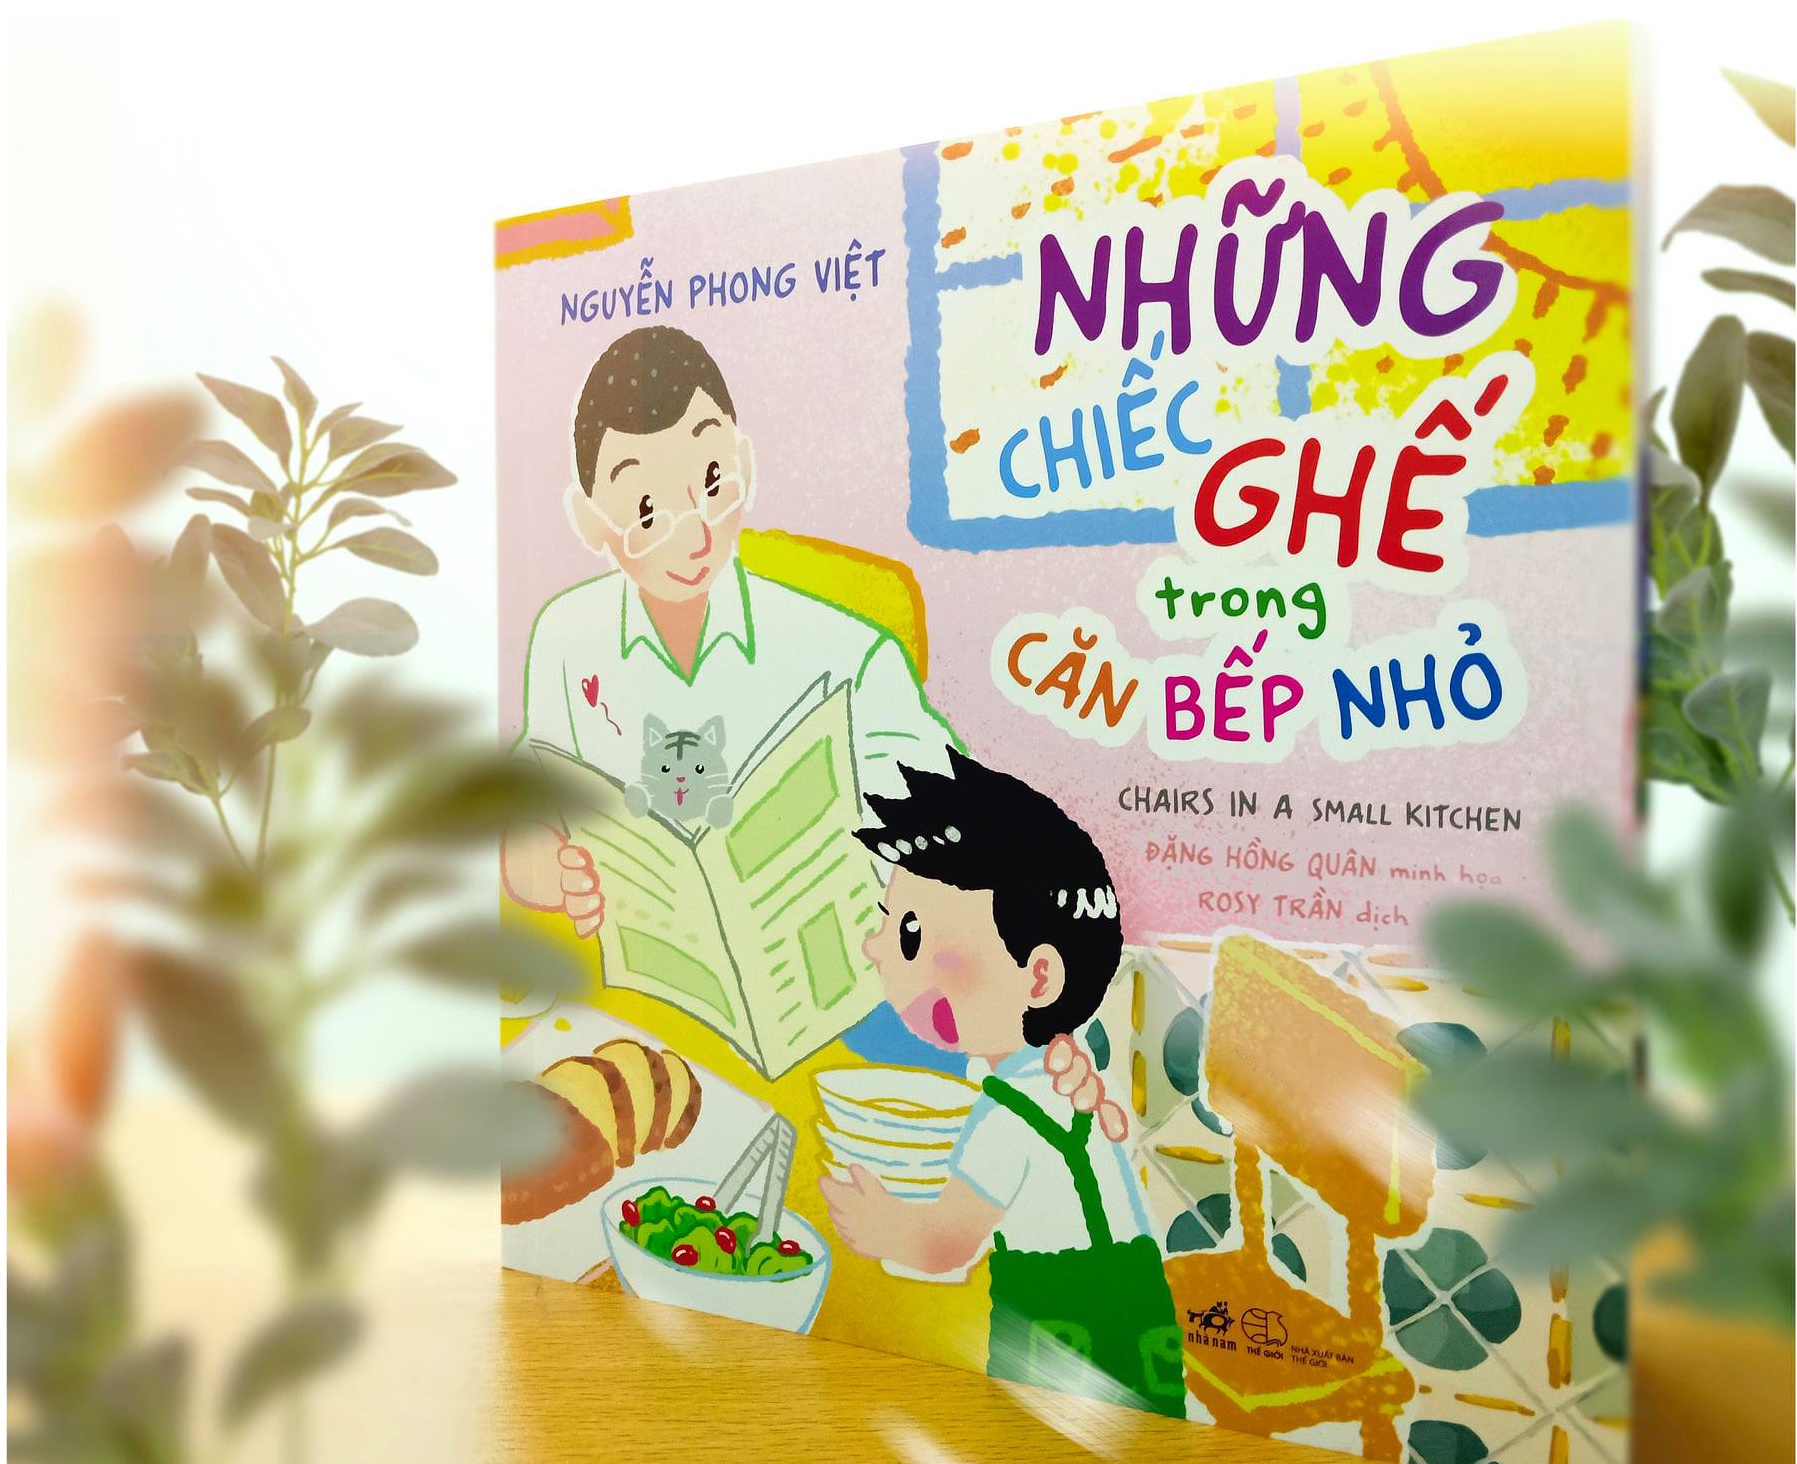 Nhung chiec ghe trong can bep nho anh 1